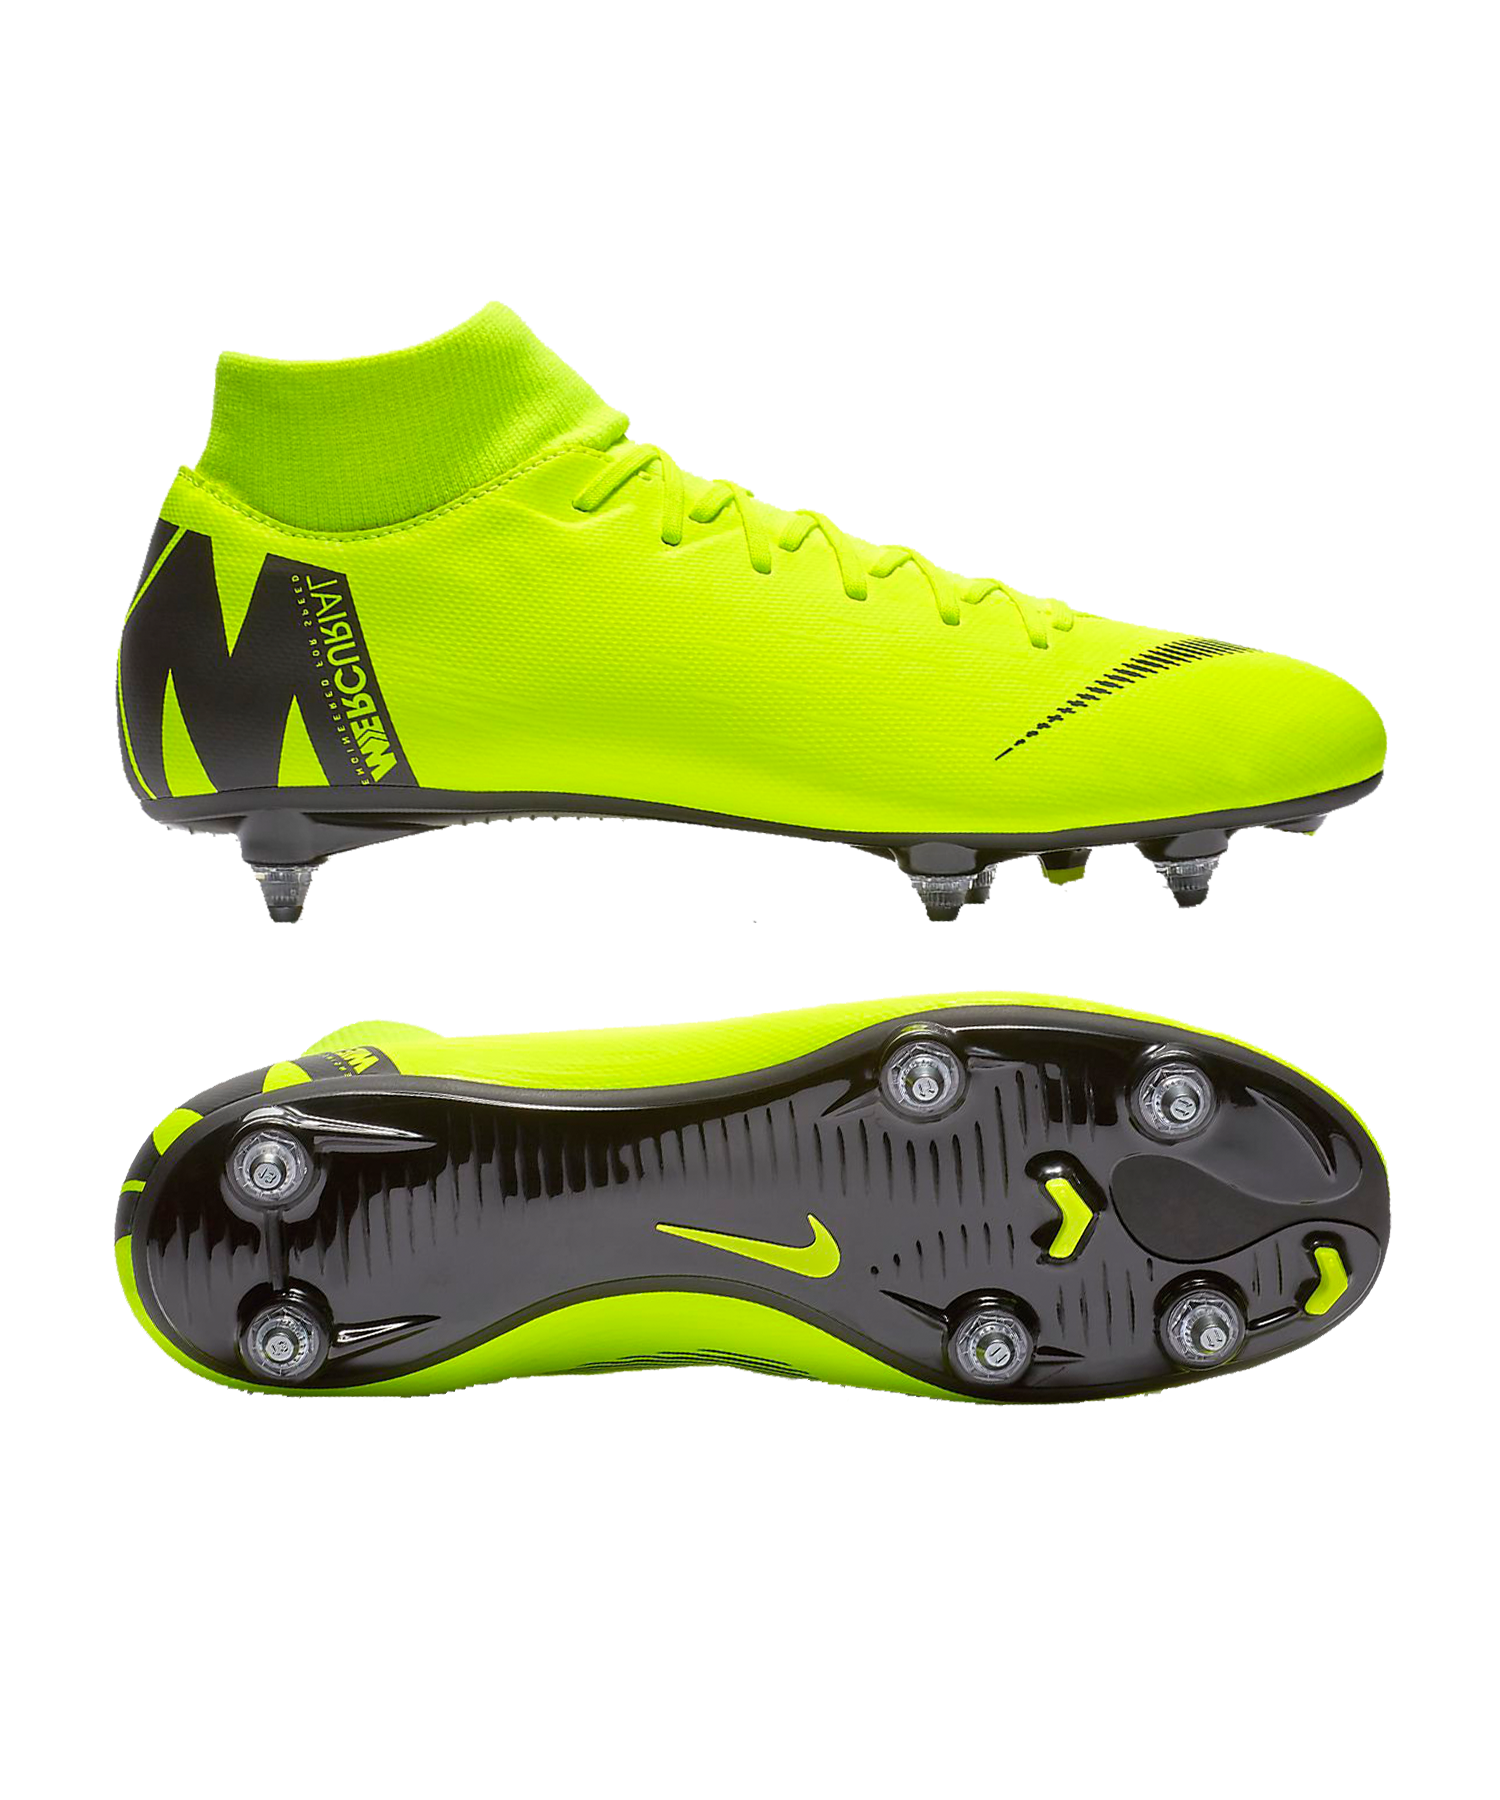 Nike Mercurial Superfly VI Pro FG Game Over KEEPERsport